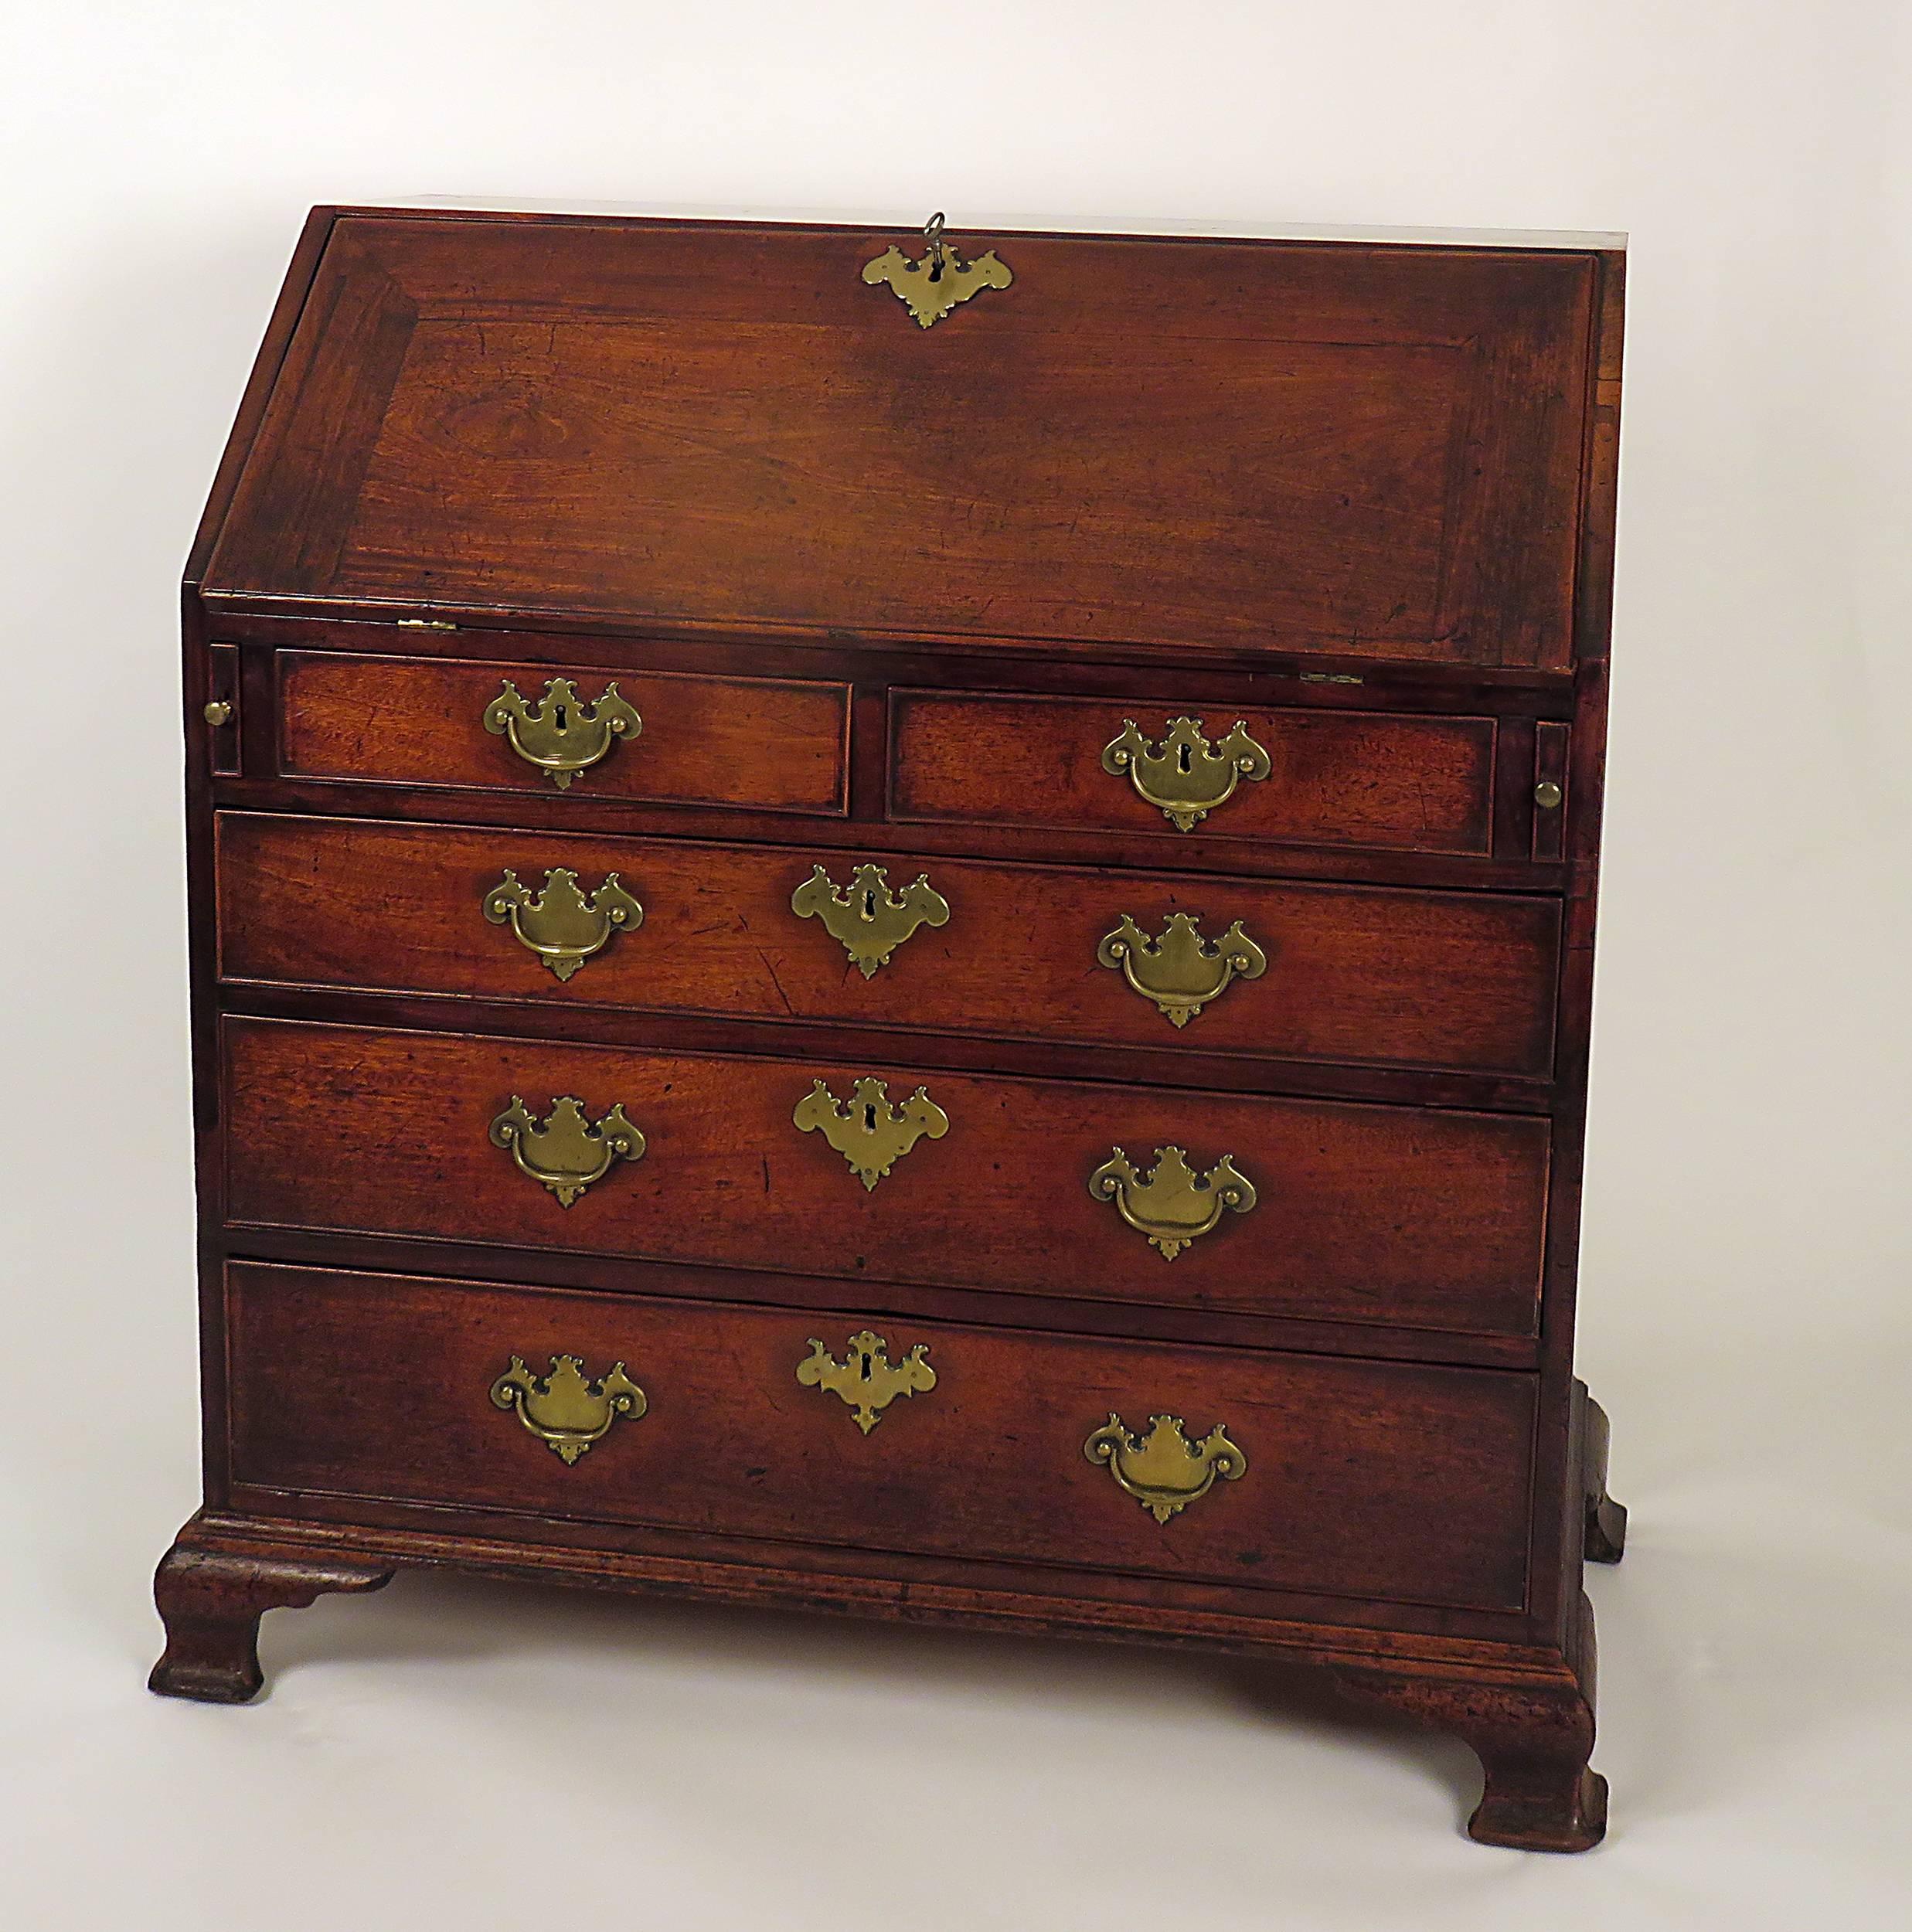 18th century English mahogany slant front desk in remarkable good condition. Rare smaller scale. Old, possibly original finish. Well fitted interior with secret compartments. Standing on four ogee bracket original feet.